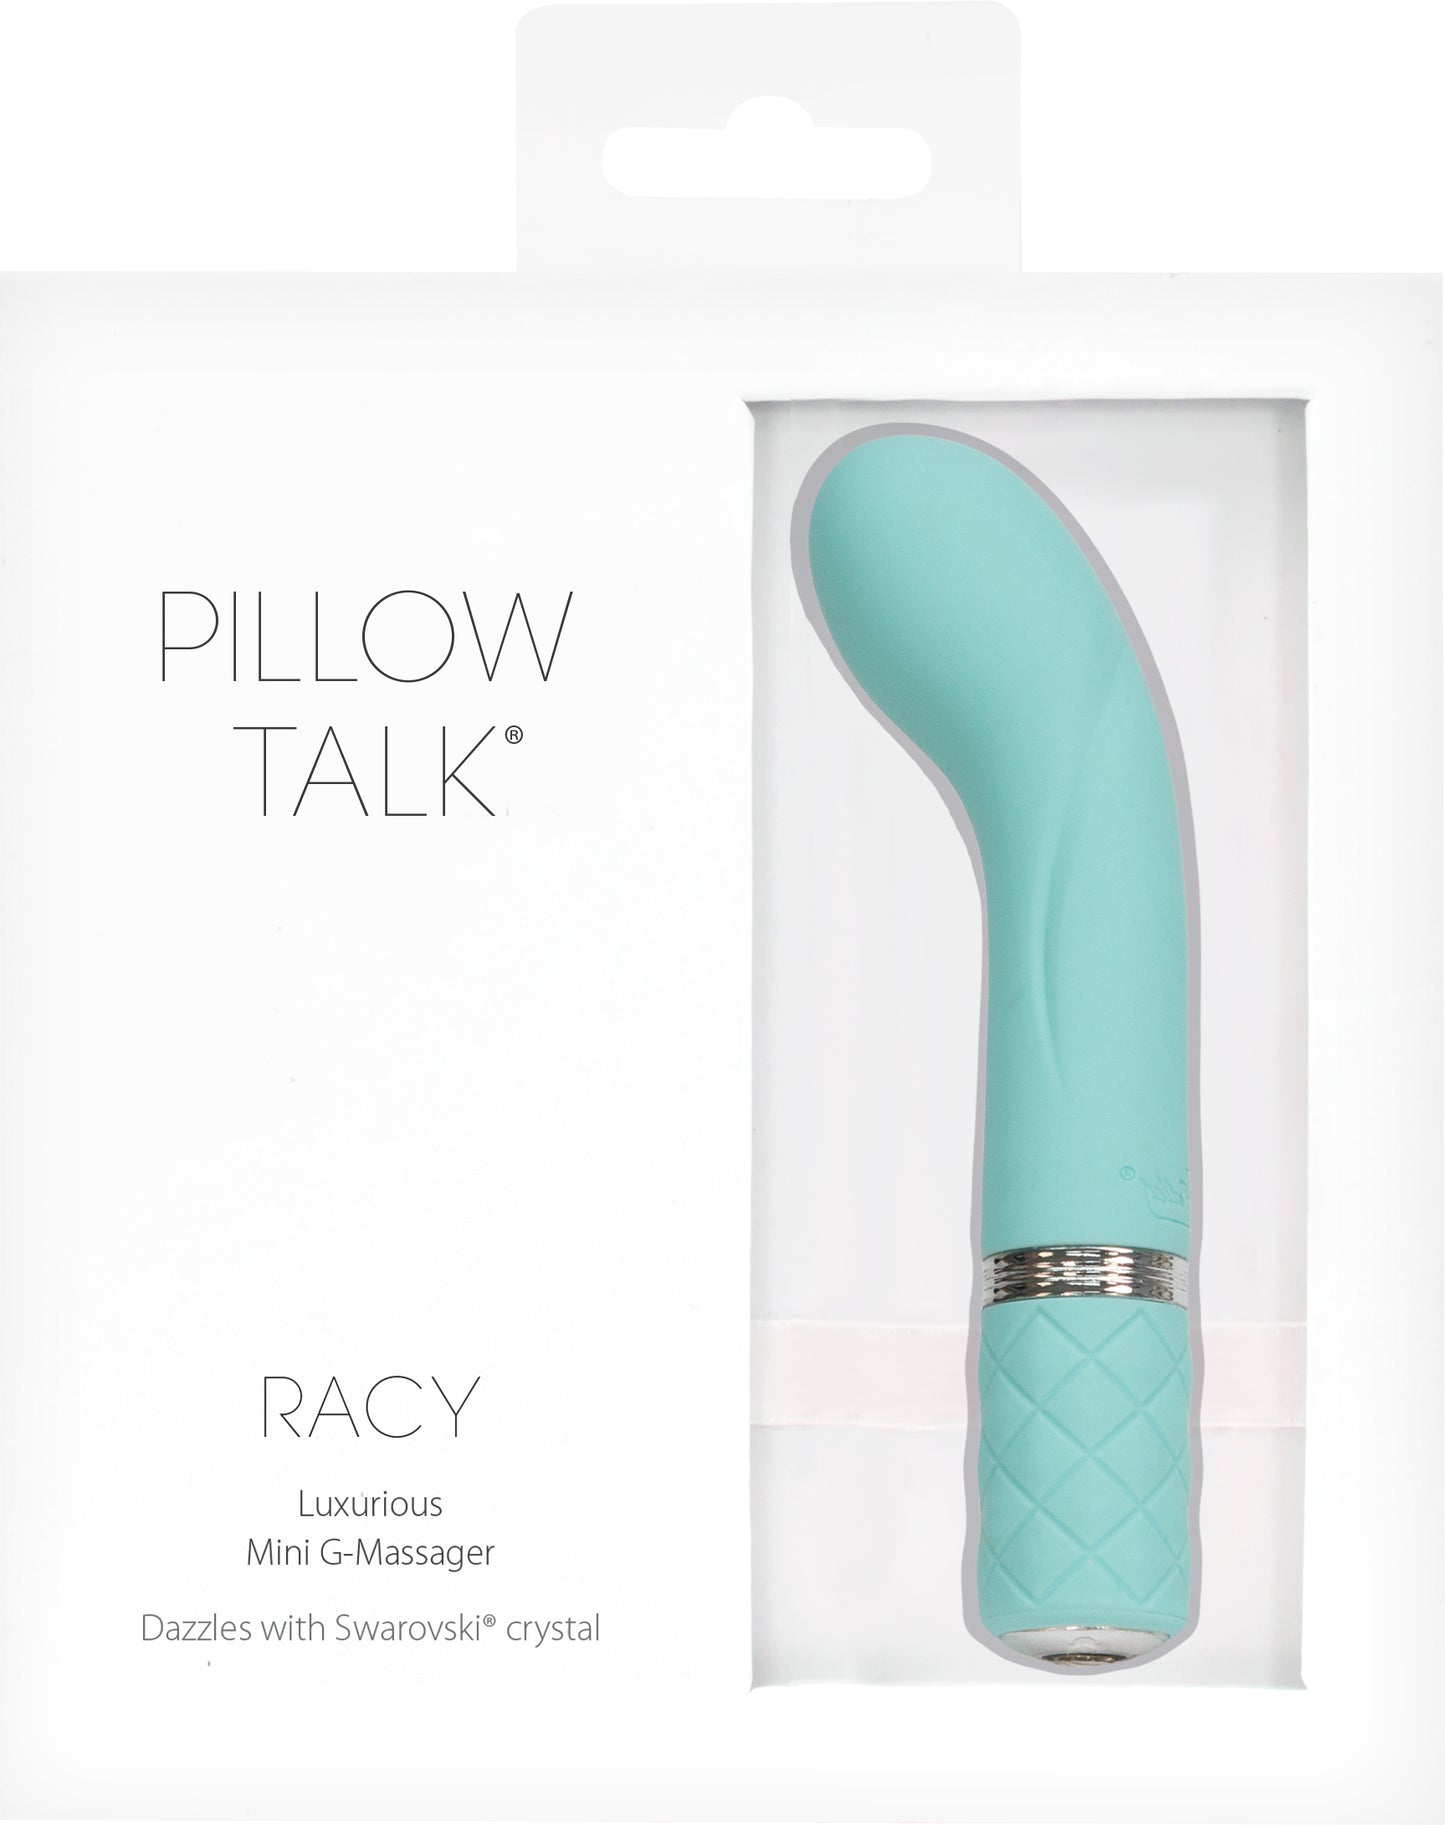 Pillow Talk Racy With Swarovski Crystal Teal - Just for you desires